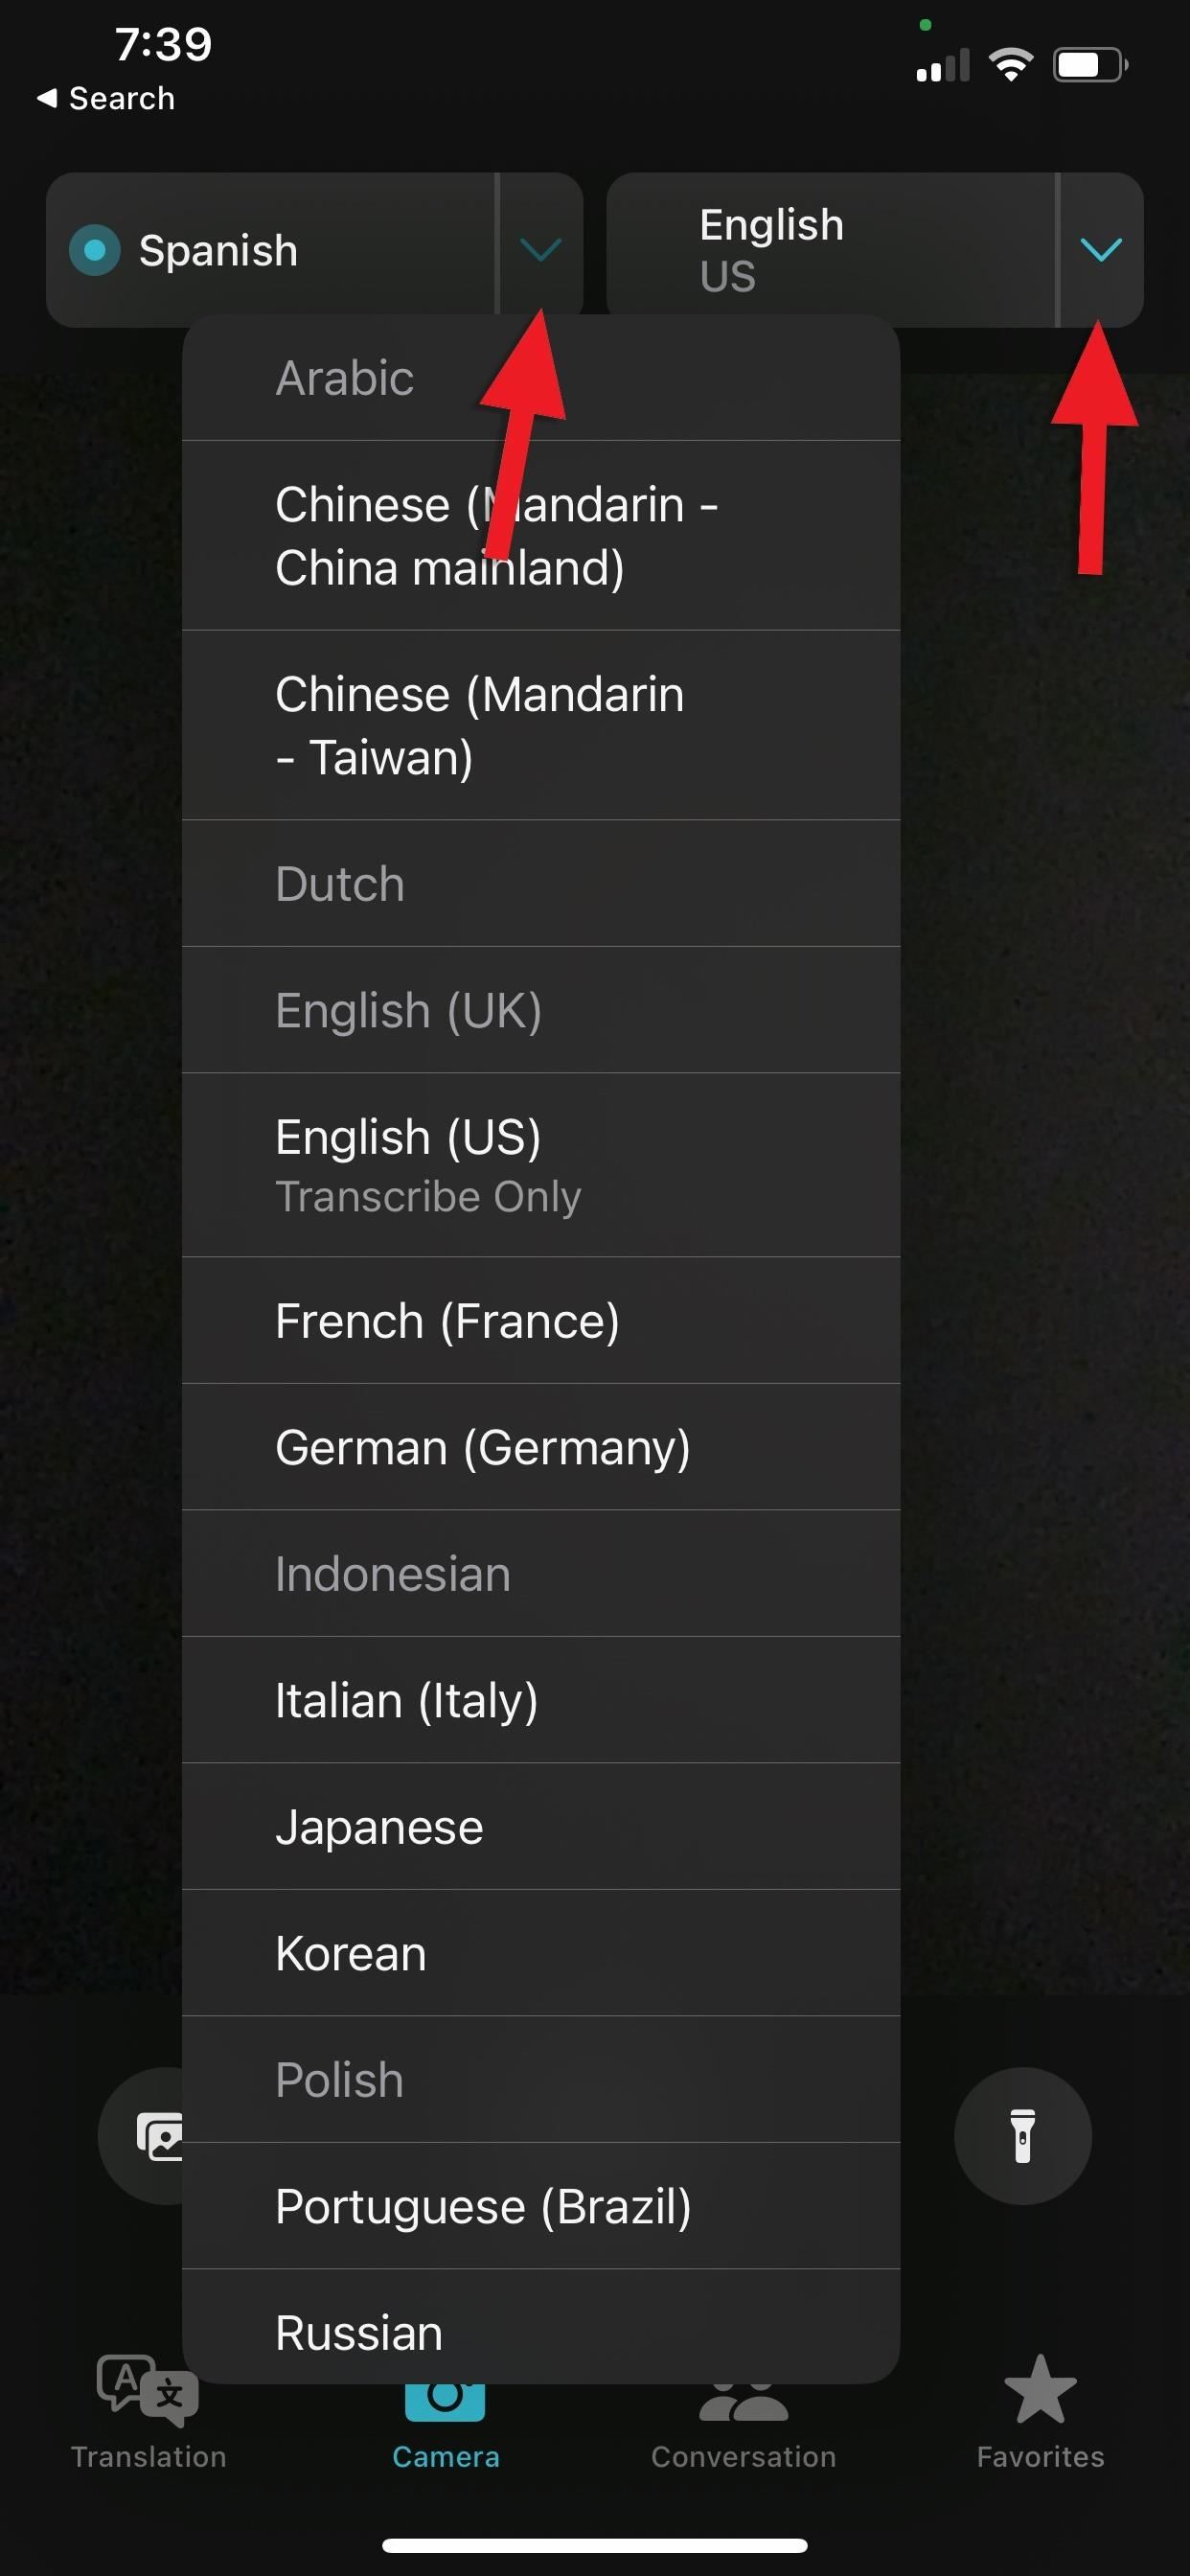 Use Your iPhone's Camera App for Real-Time Translations and Unit Conversions